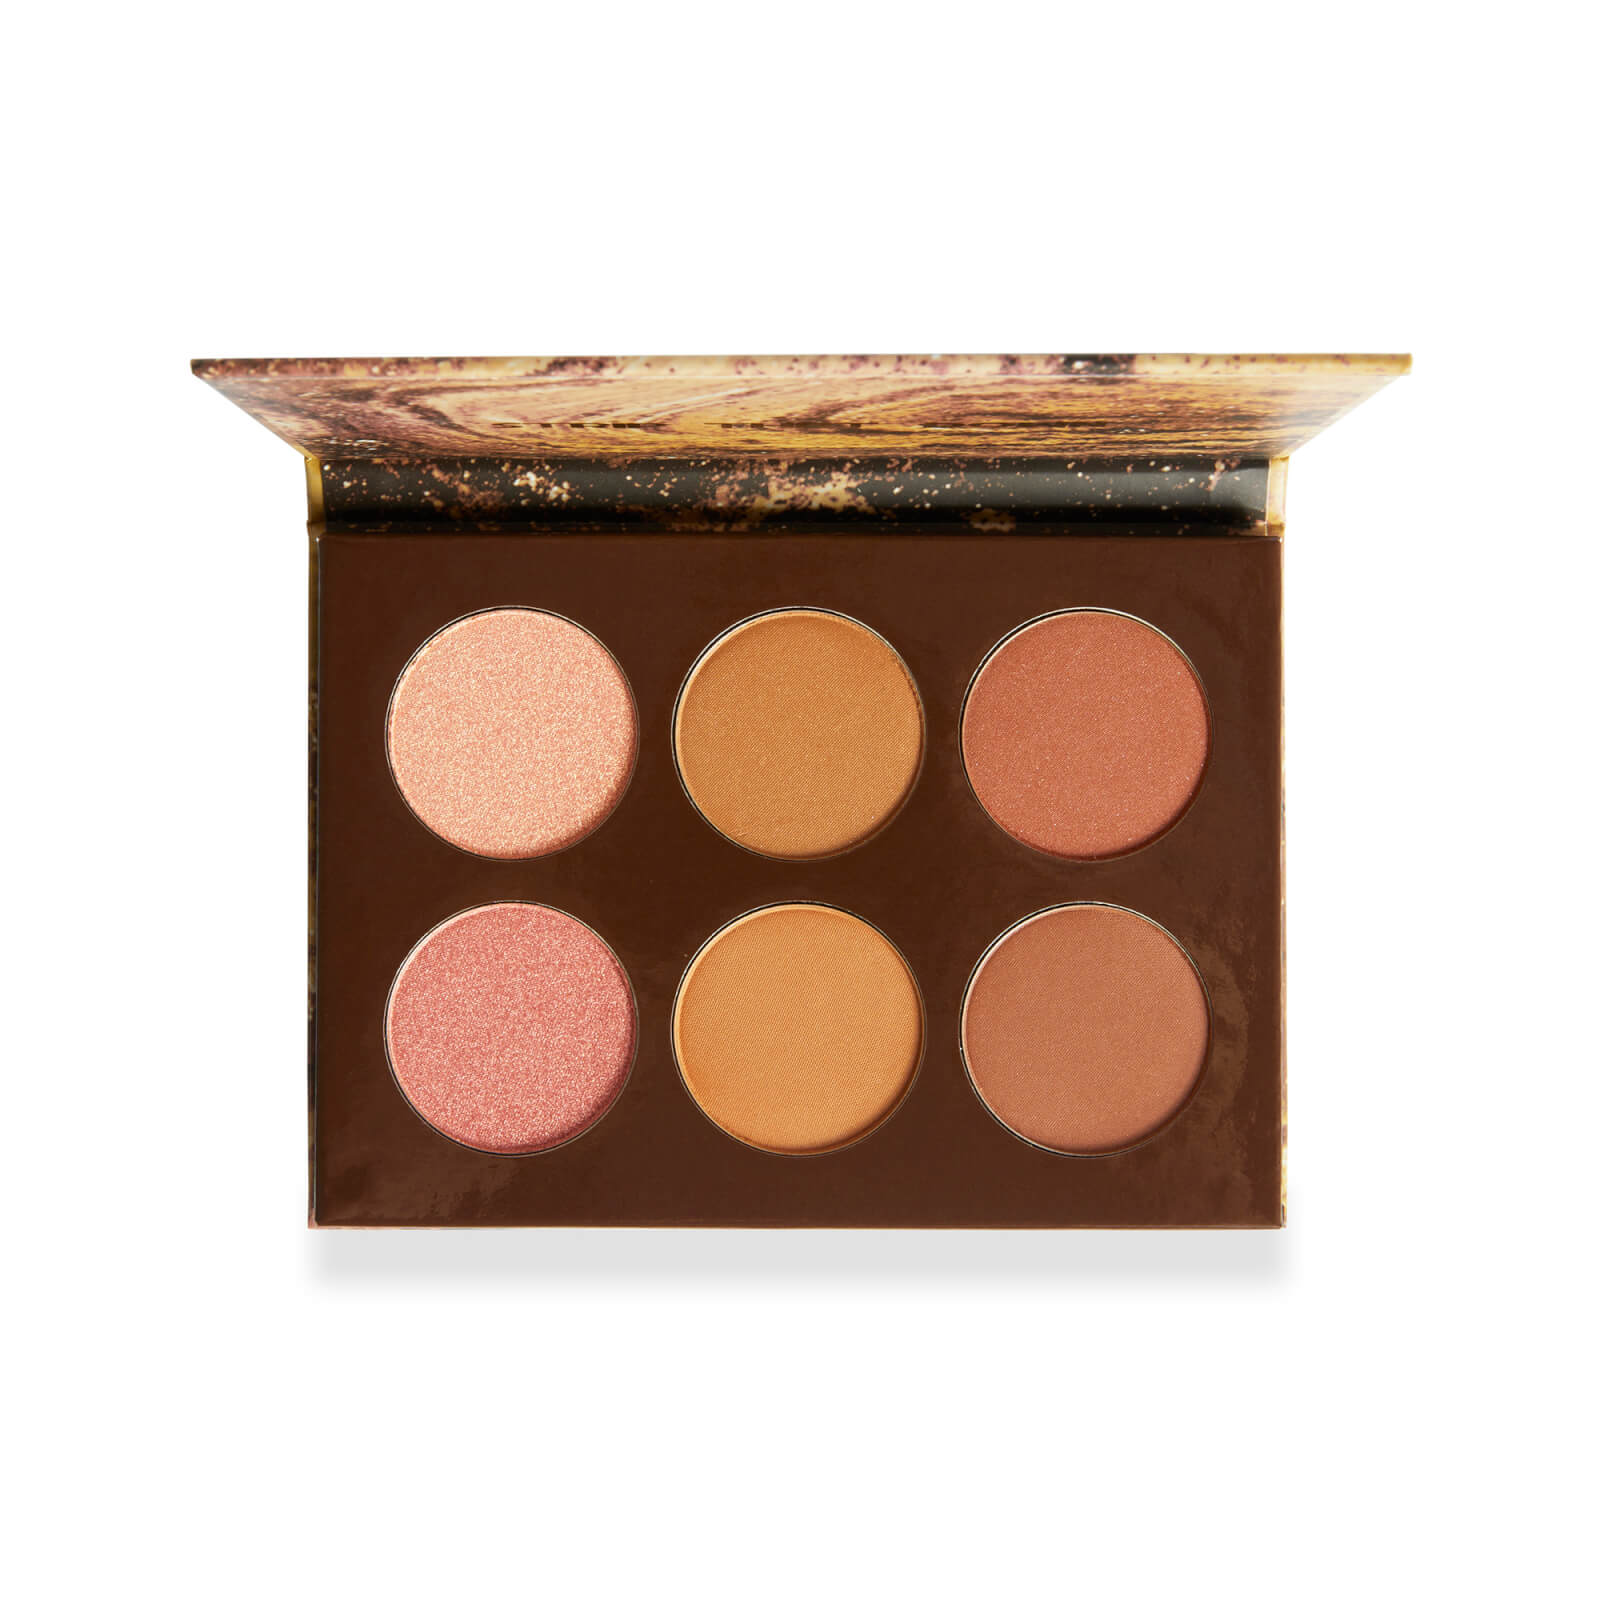 Image of BH Cosmetics In the Buff - All-In-One Face Palette - Light/Medium